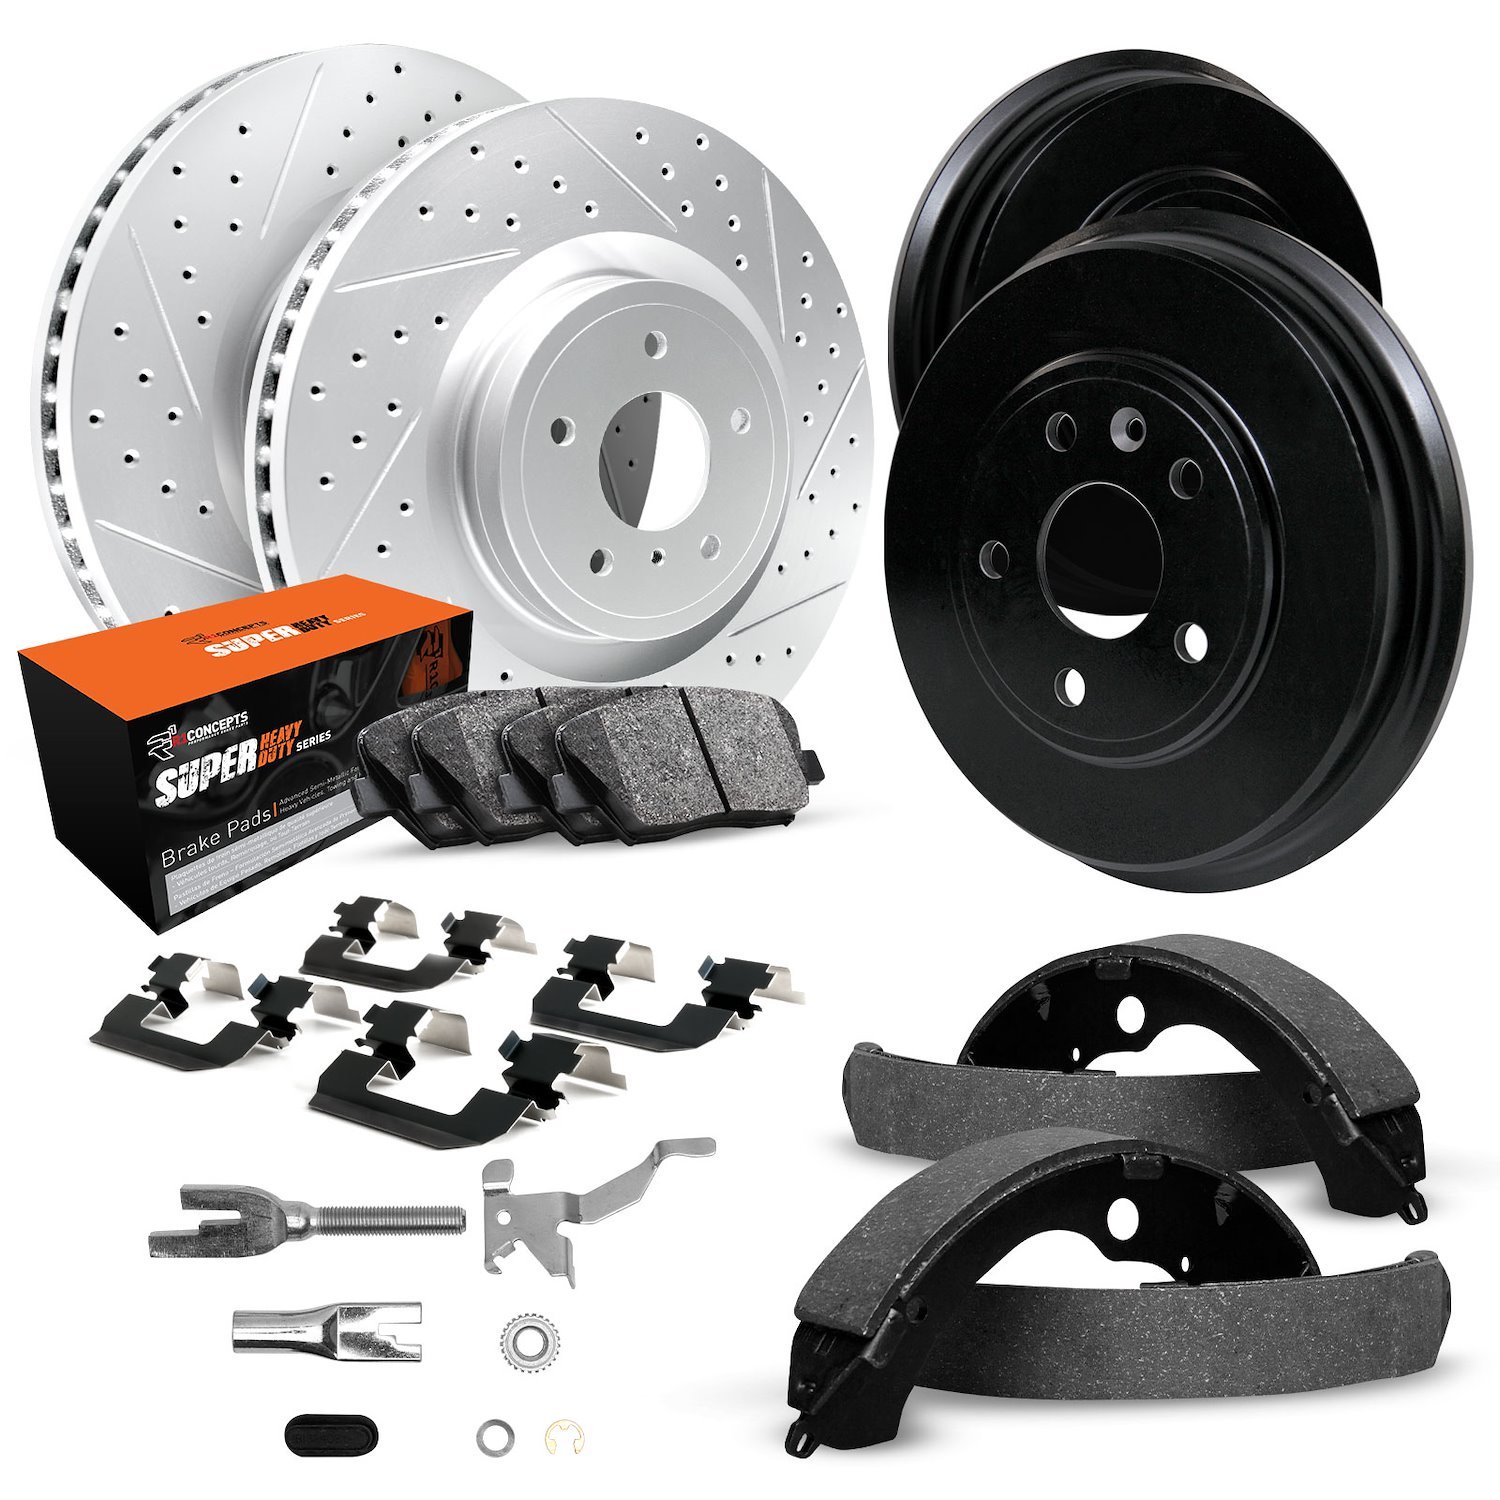 GEO-Carbon Drilled/Slotted Rotors/Drums w/Super-Duty Pads/Shoes/Hardware/Adjusters, 1990-1992 Mopar, Position: Front/Rear